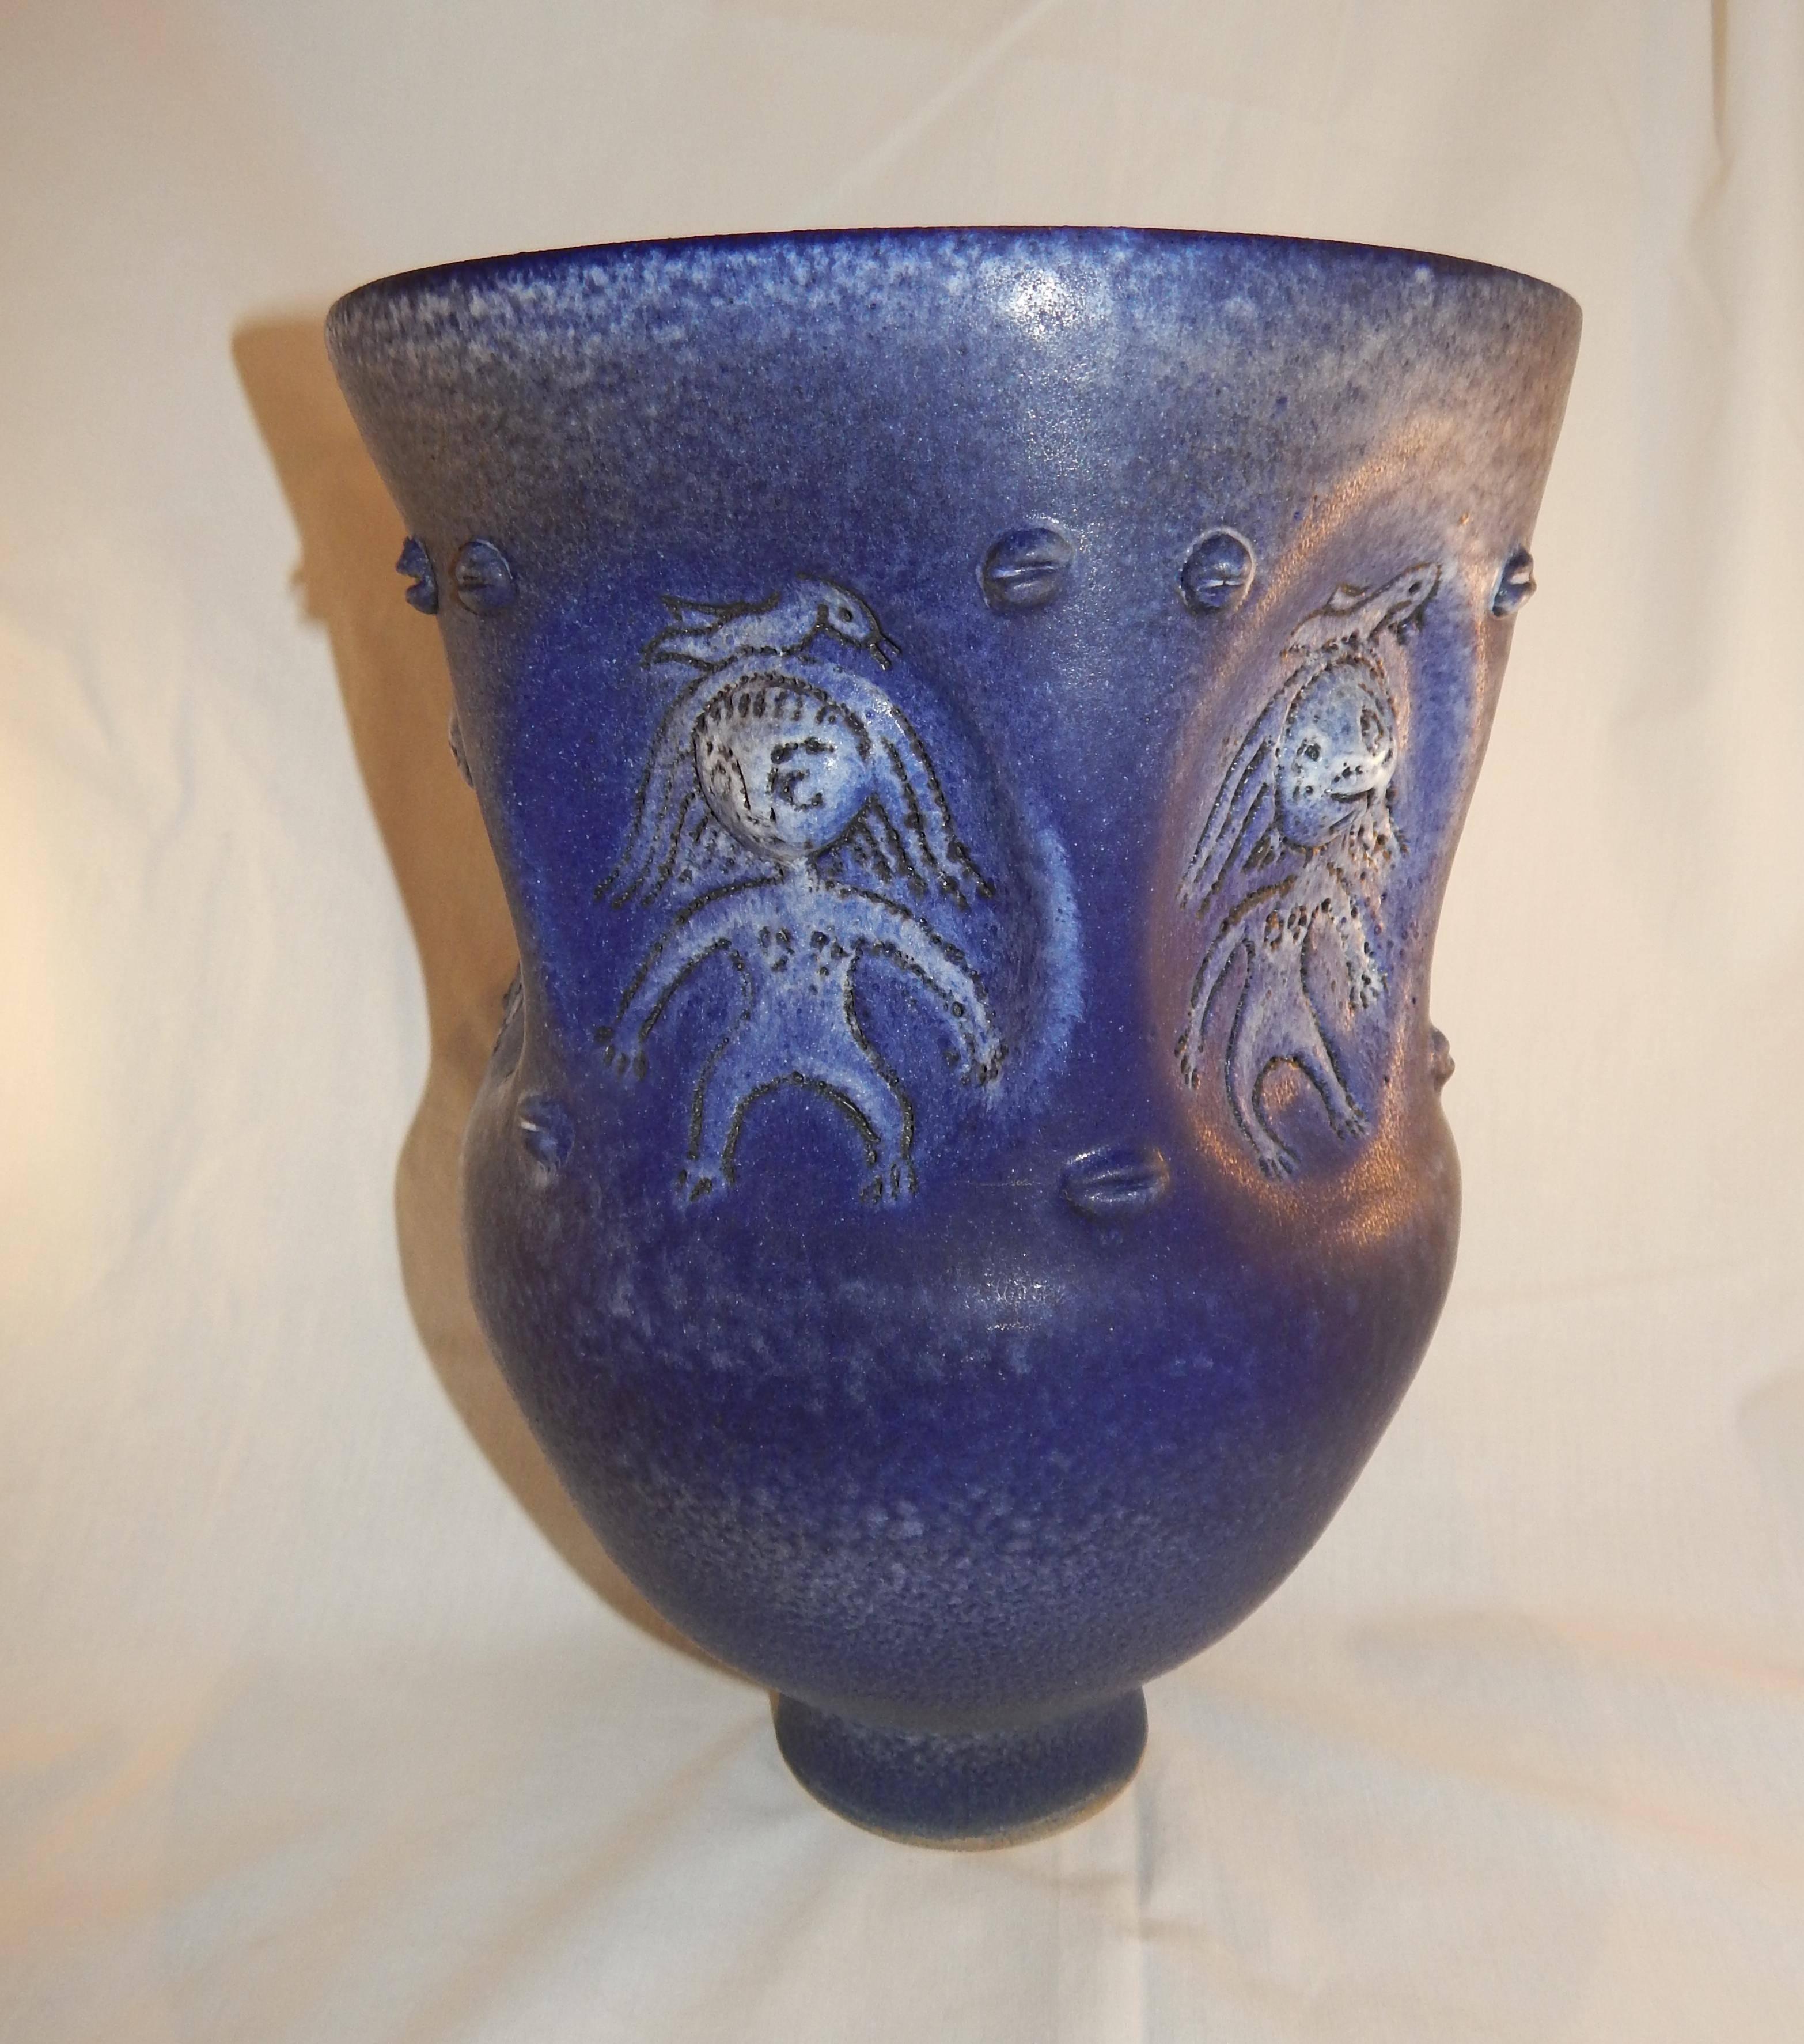 Blue studio pottery vase in excellent condition with incised female figures, 1996.
Created by Edwin (1910-2008) and Mary (1908-2007) Scheier.
Signed and dated inside the foot. Measure: 10.75